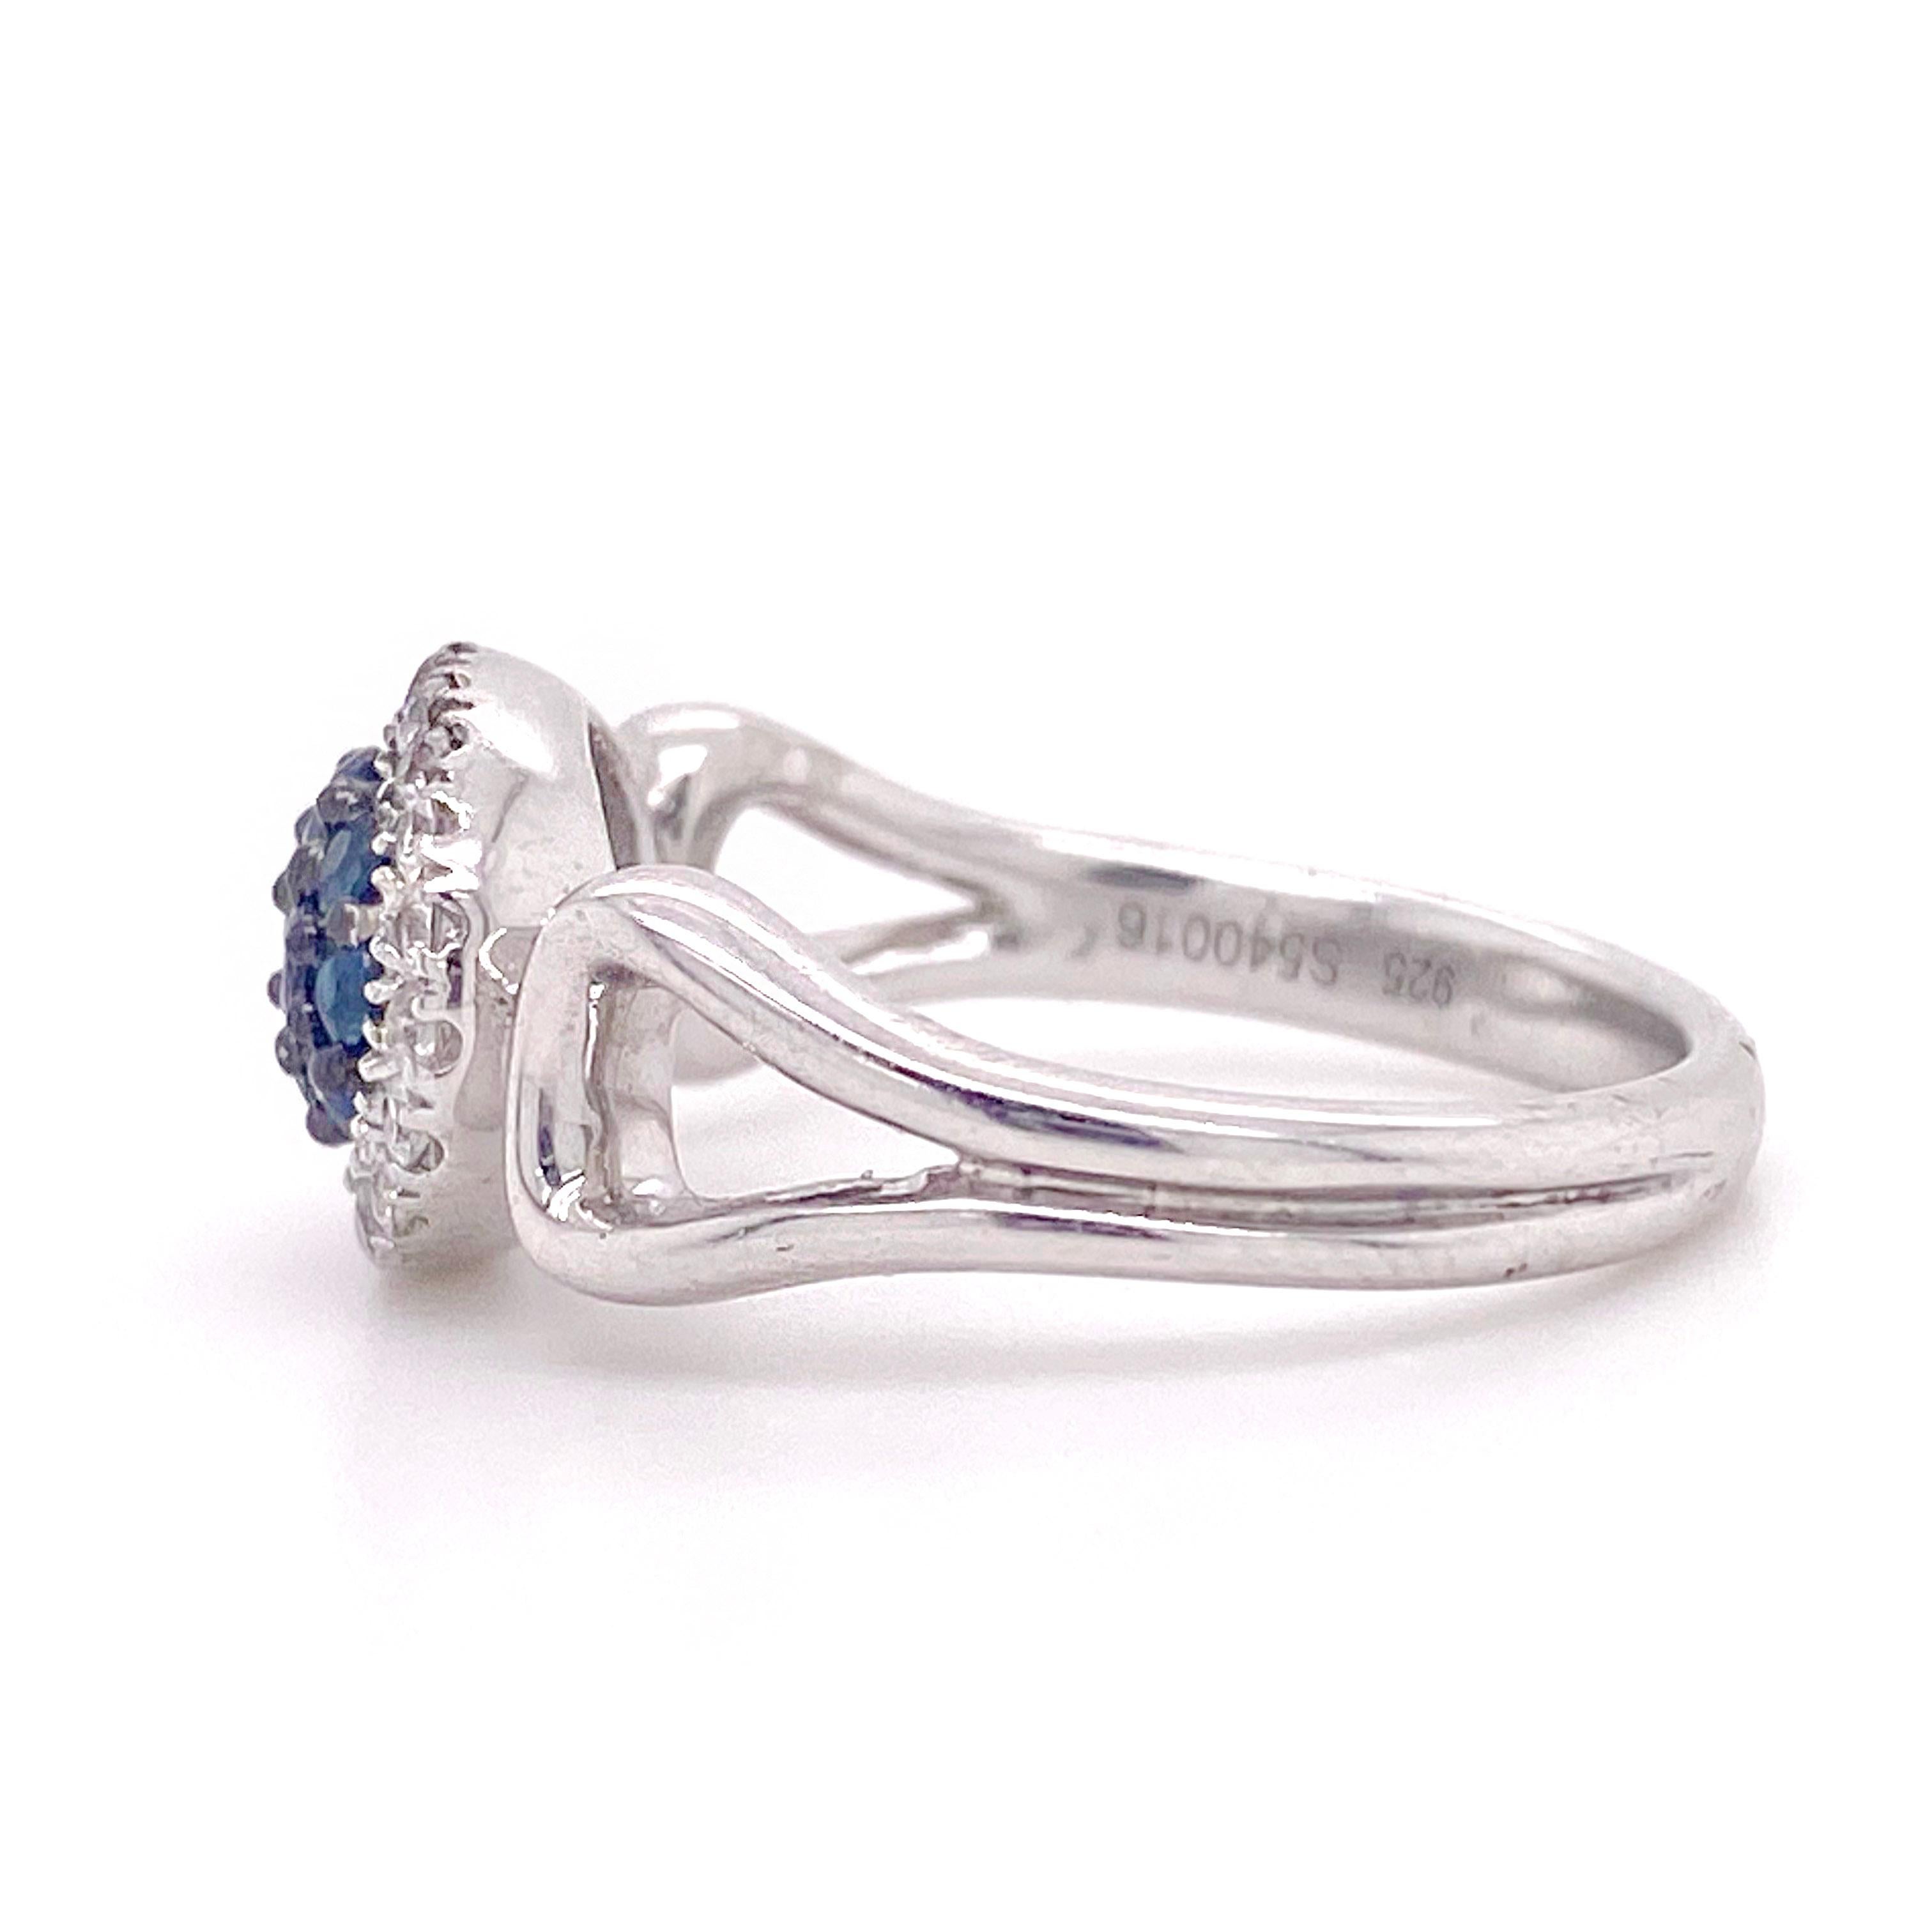 925 silver ring with blue sapphire